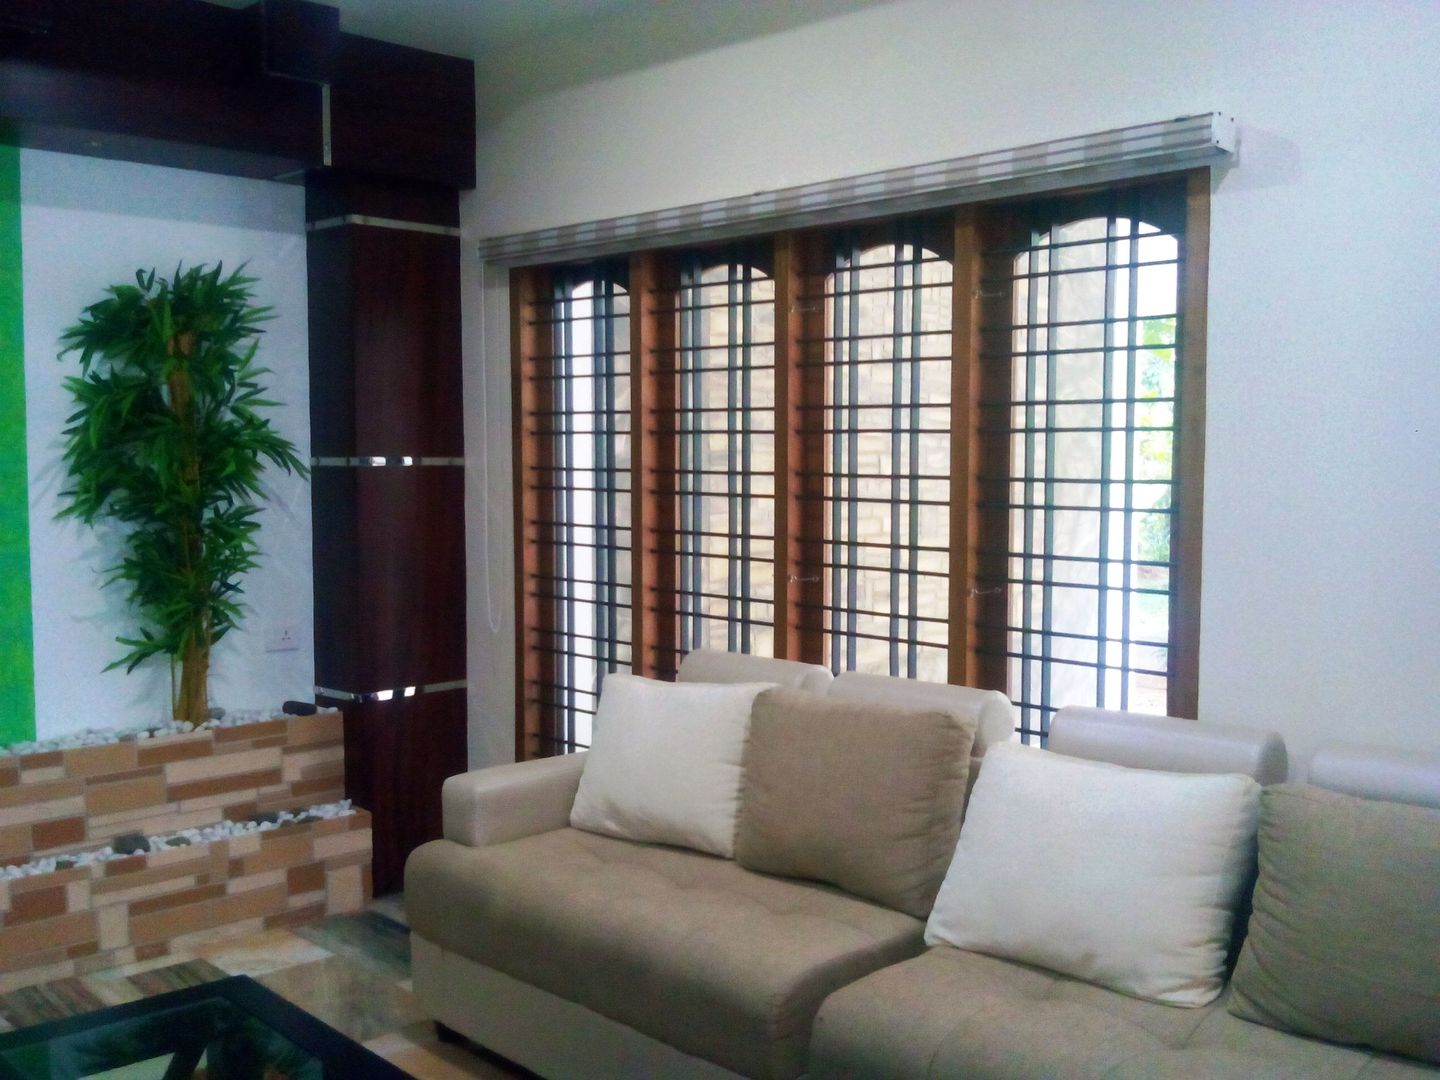 Pleated Zebra Blinds, Clinque window blind systems Clinque window blind systems شبابيك ستائر